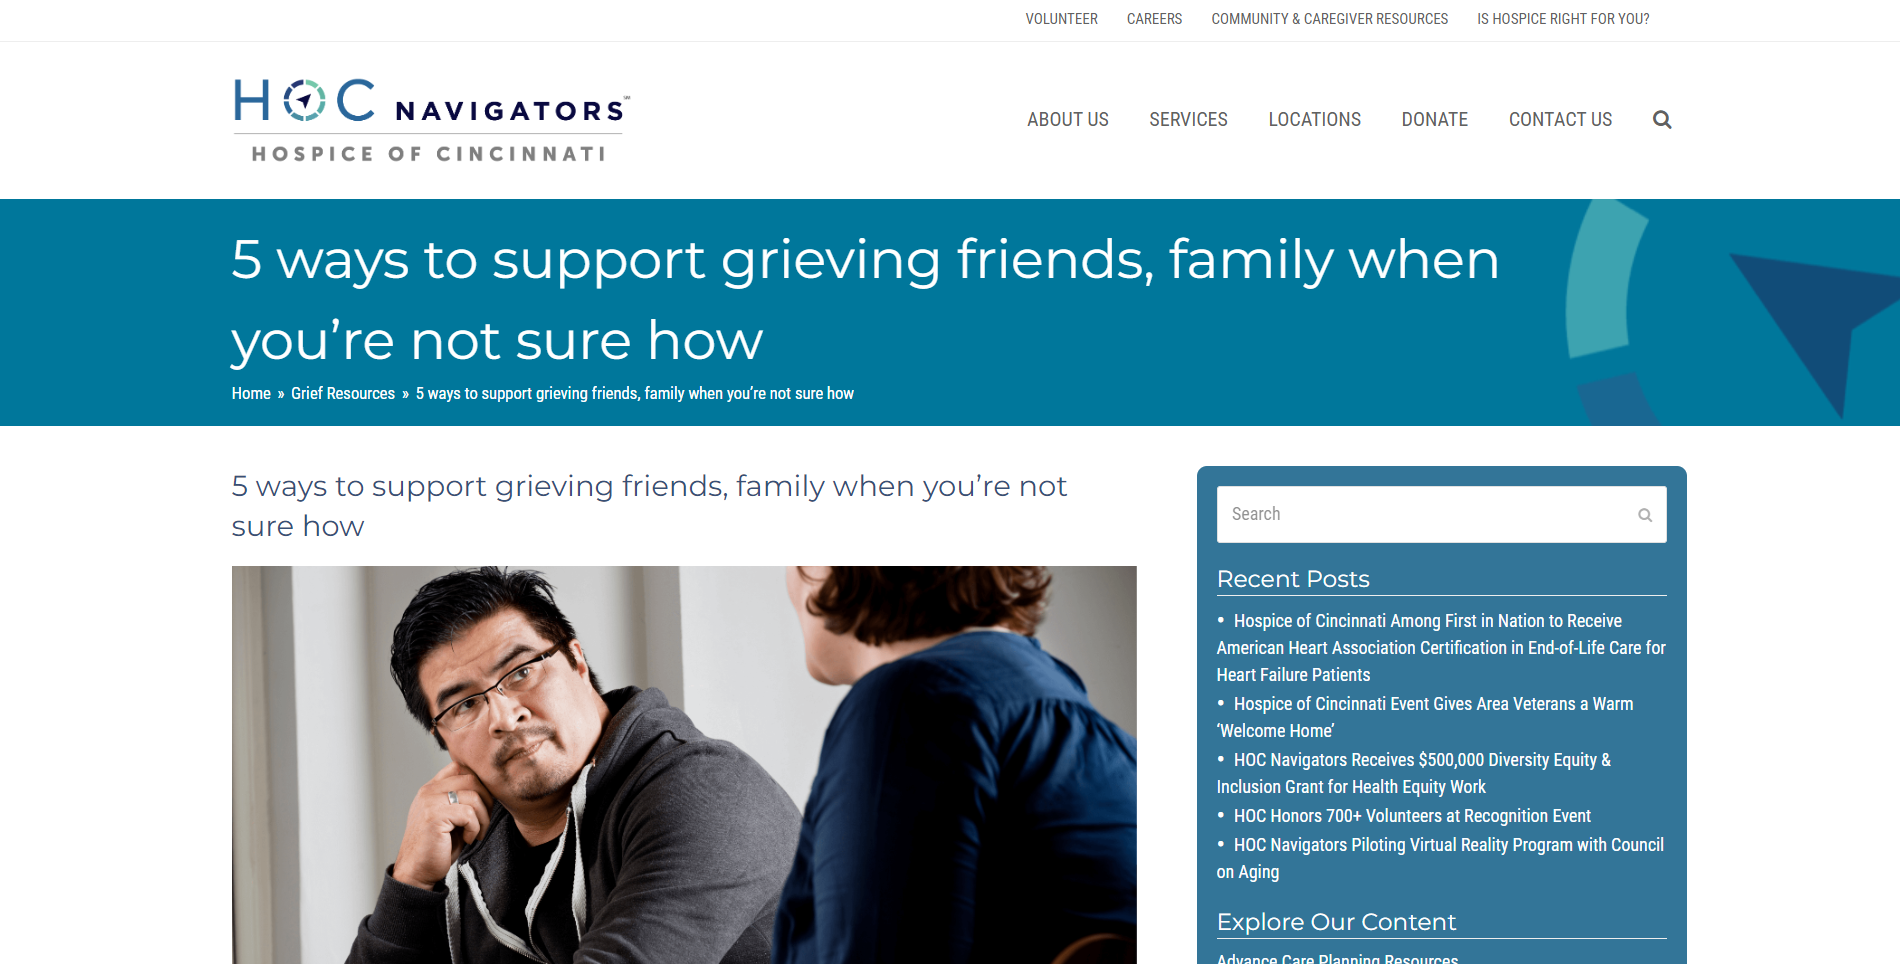 5 ways to support grieving friends, family when you’re not sure how